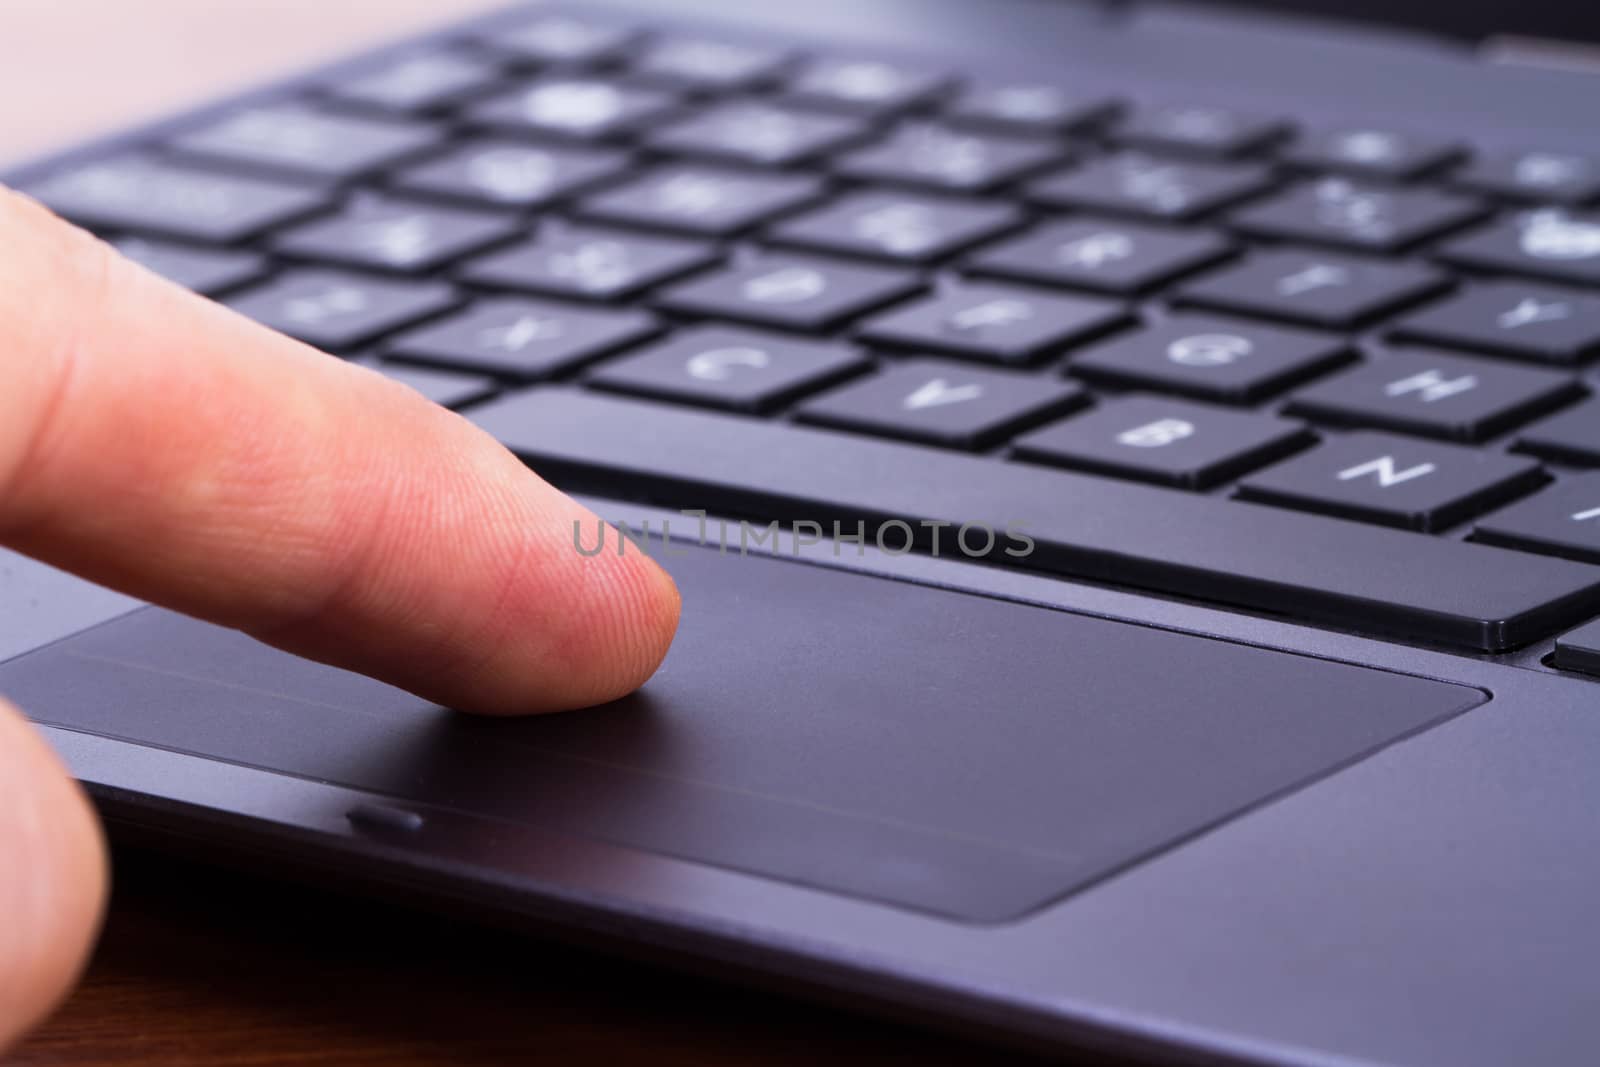 Index finger touching touch pad on laptop keyboard.